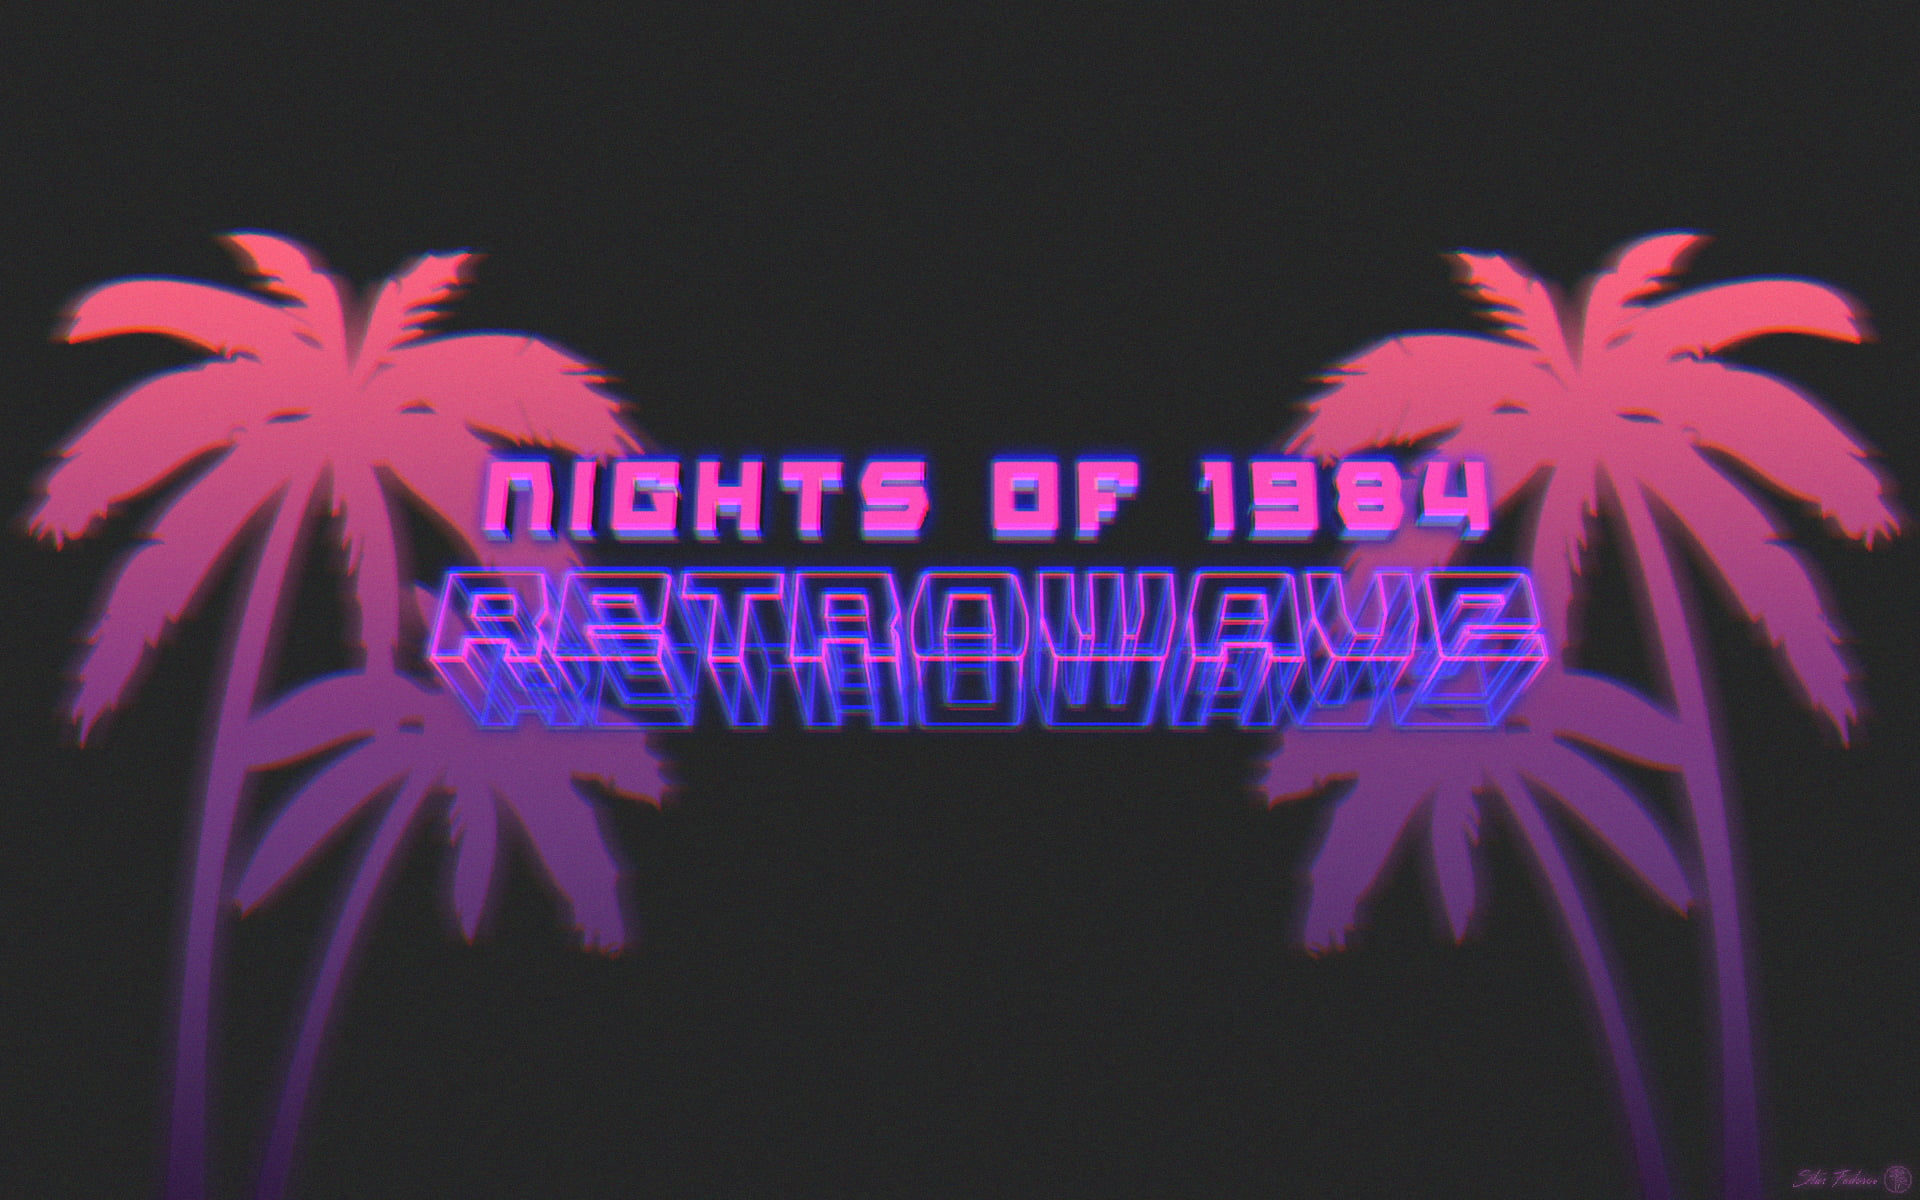 Nights of 1984 Retrowave poster, New Retro Wave, neon, 1980s